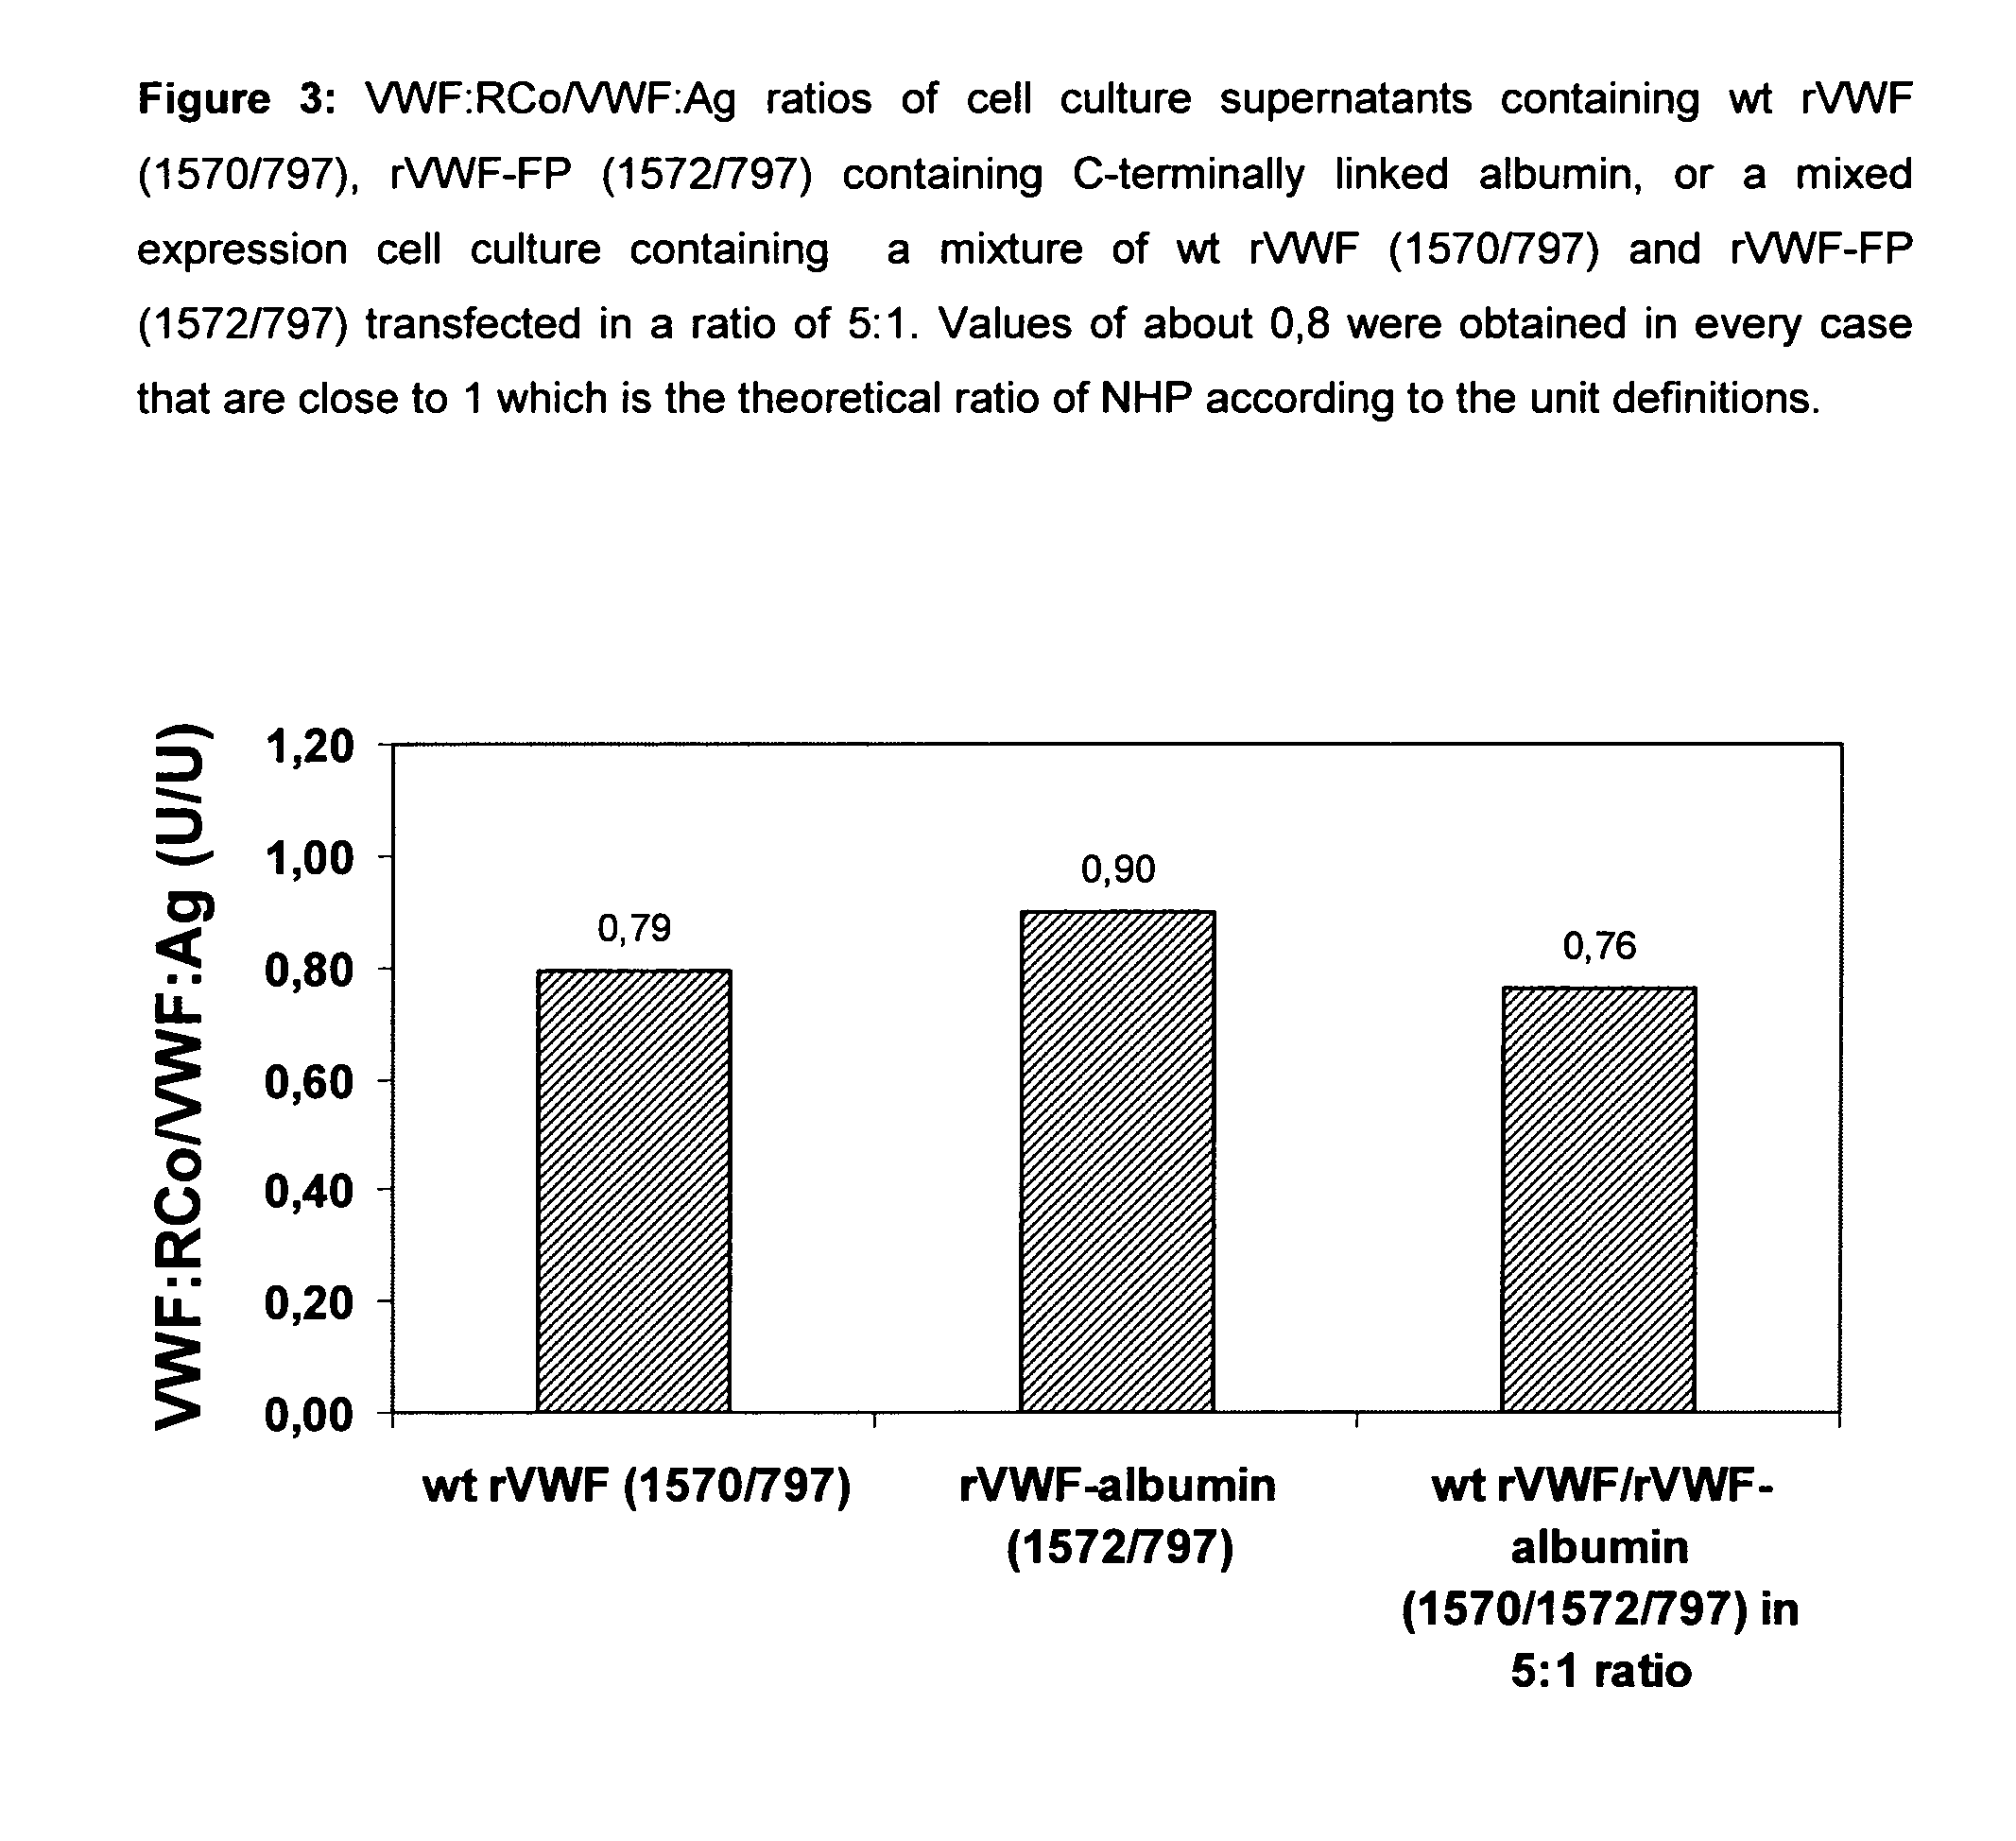 Factor VIII, von willebrand factor or complexes thereof with prolonged in vivo half-life